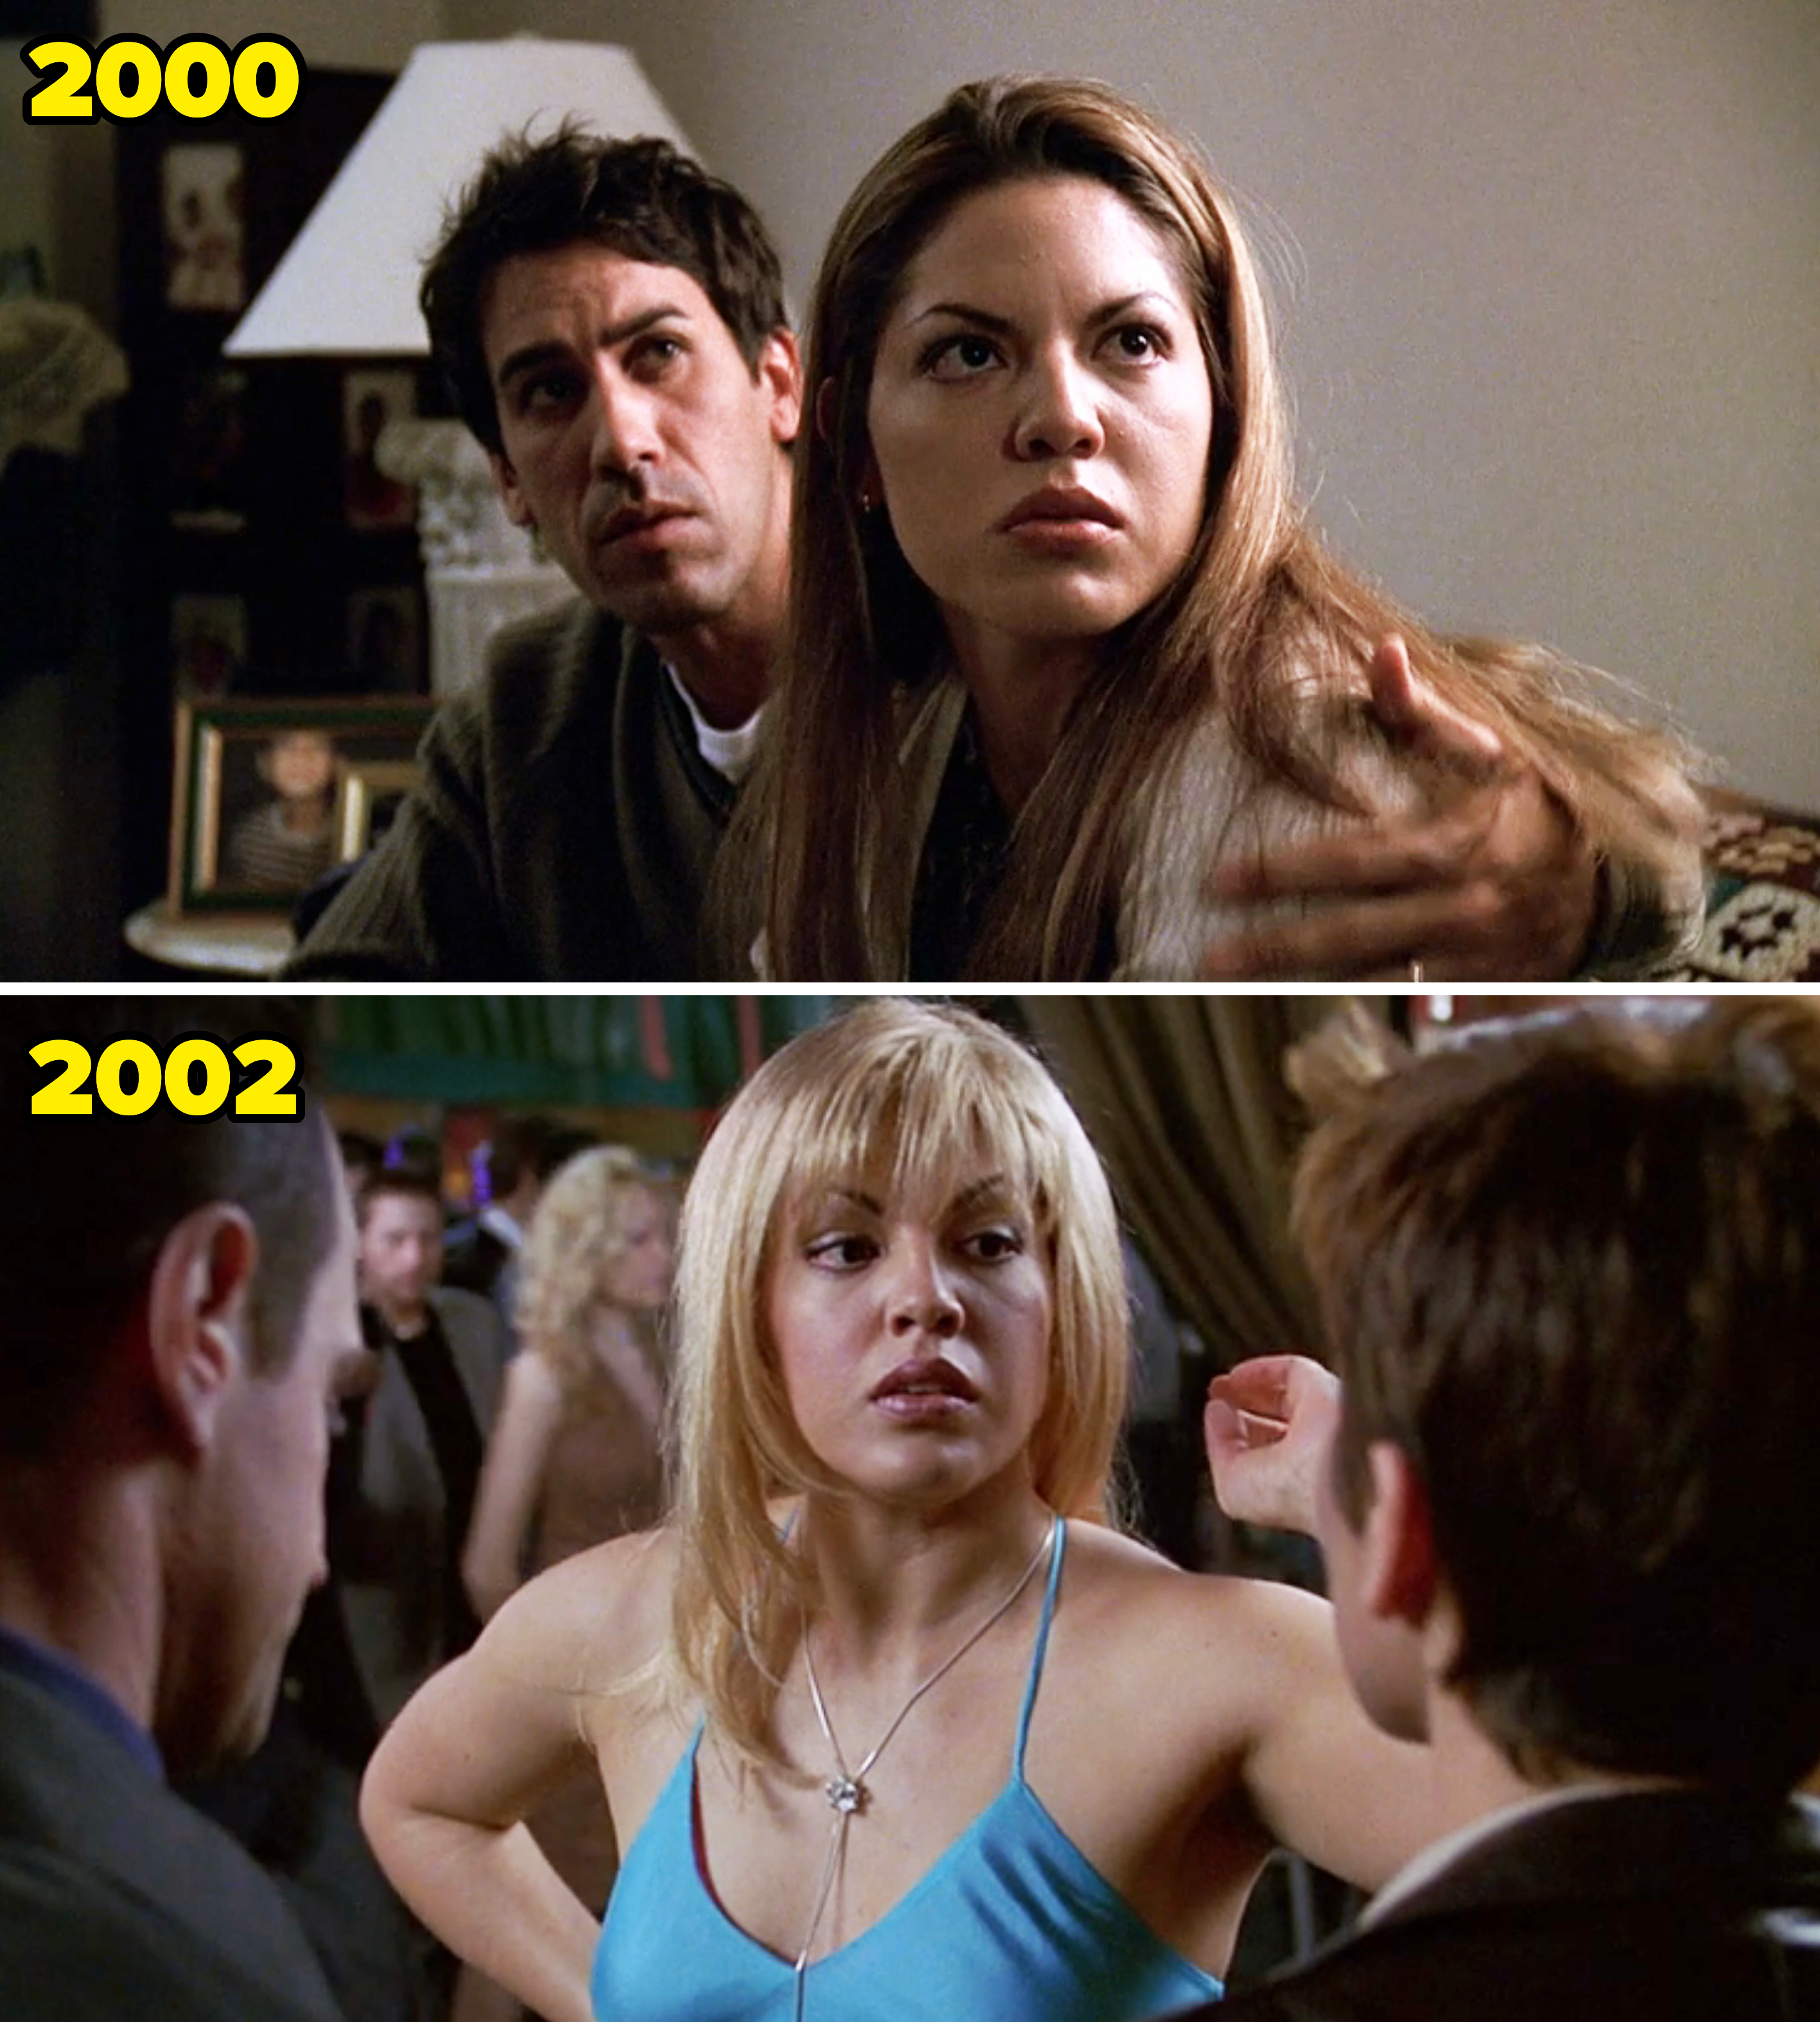 their character in 2000 and 2002